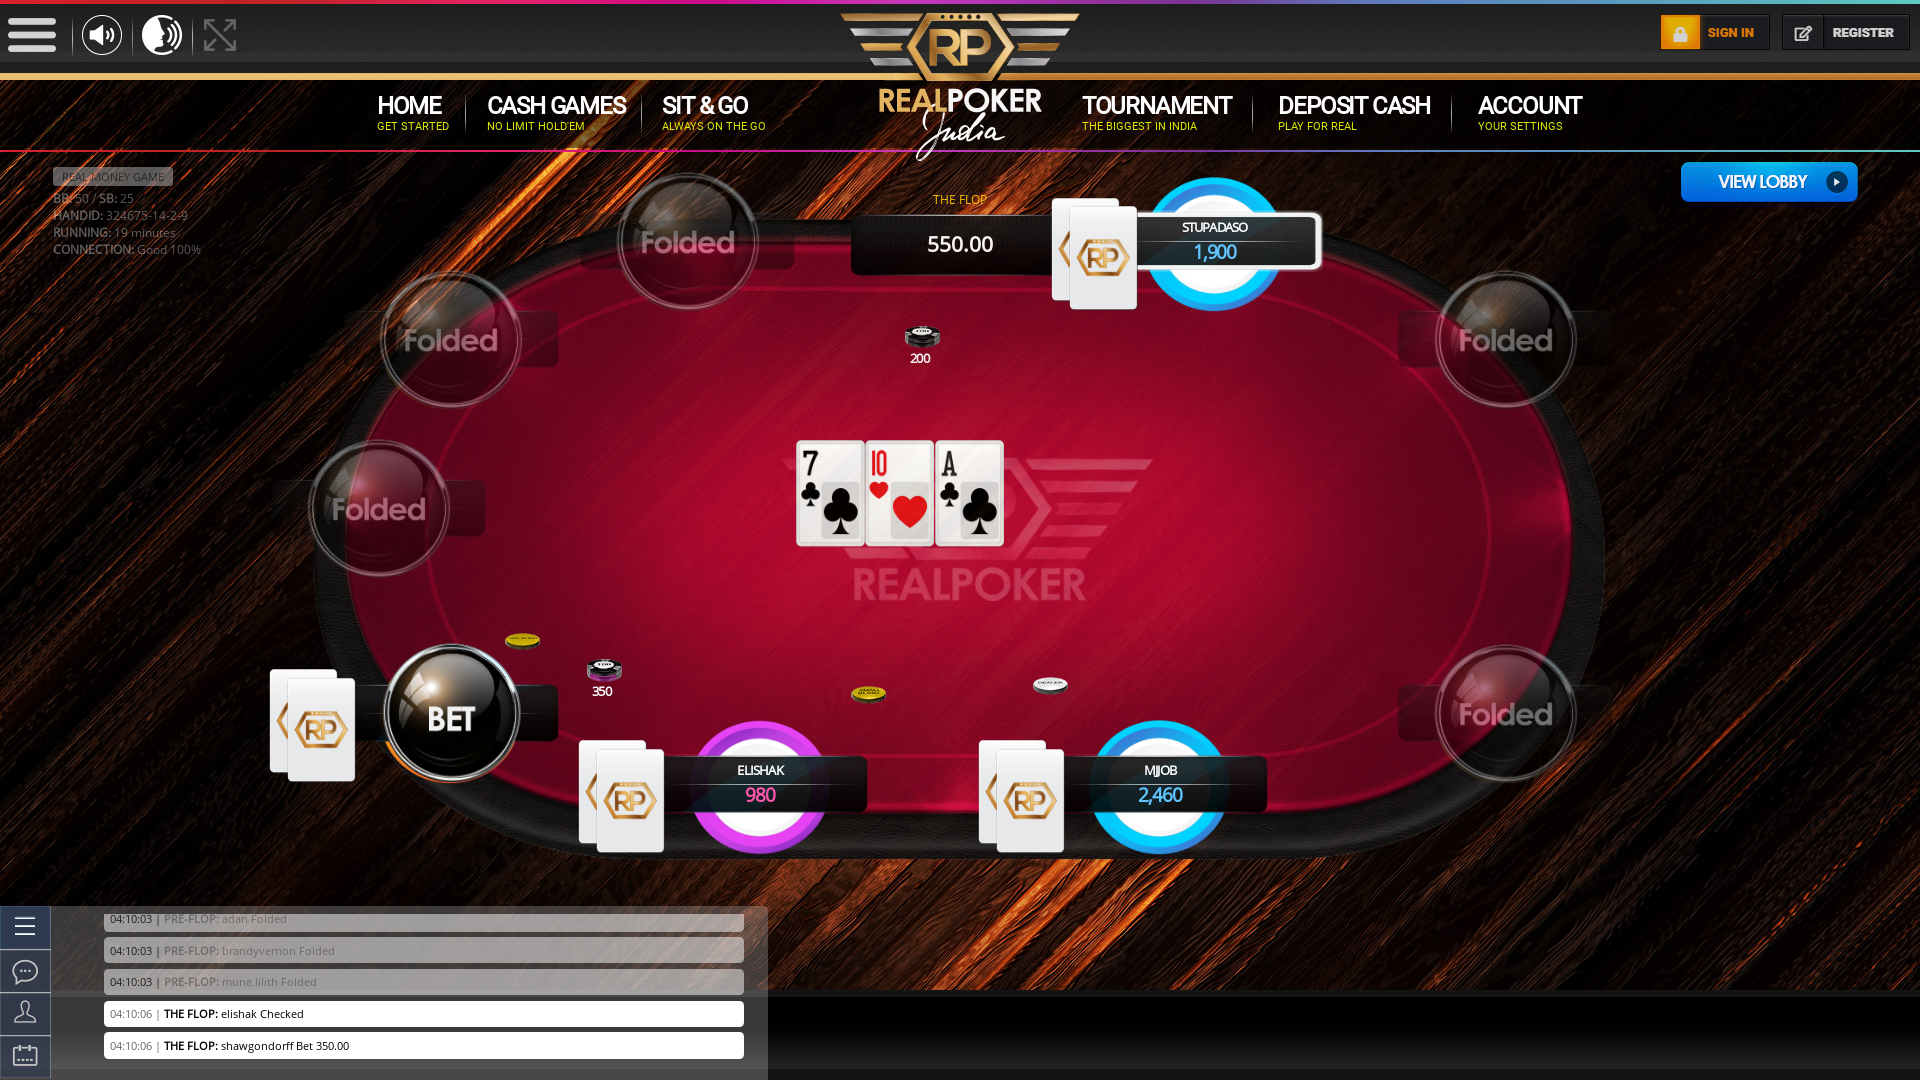 10 player texas holdem table at real poker with the table id 324675